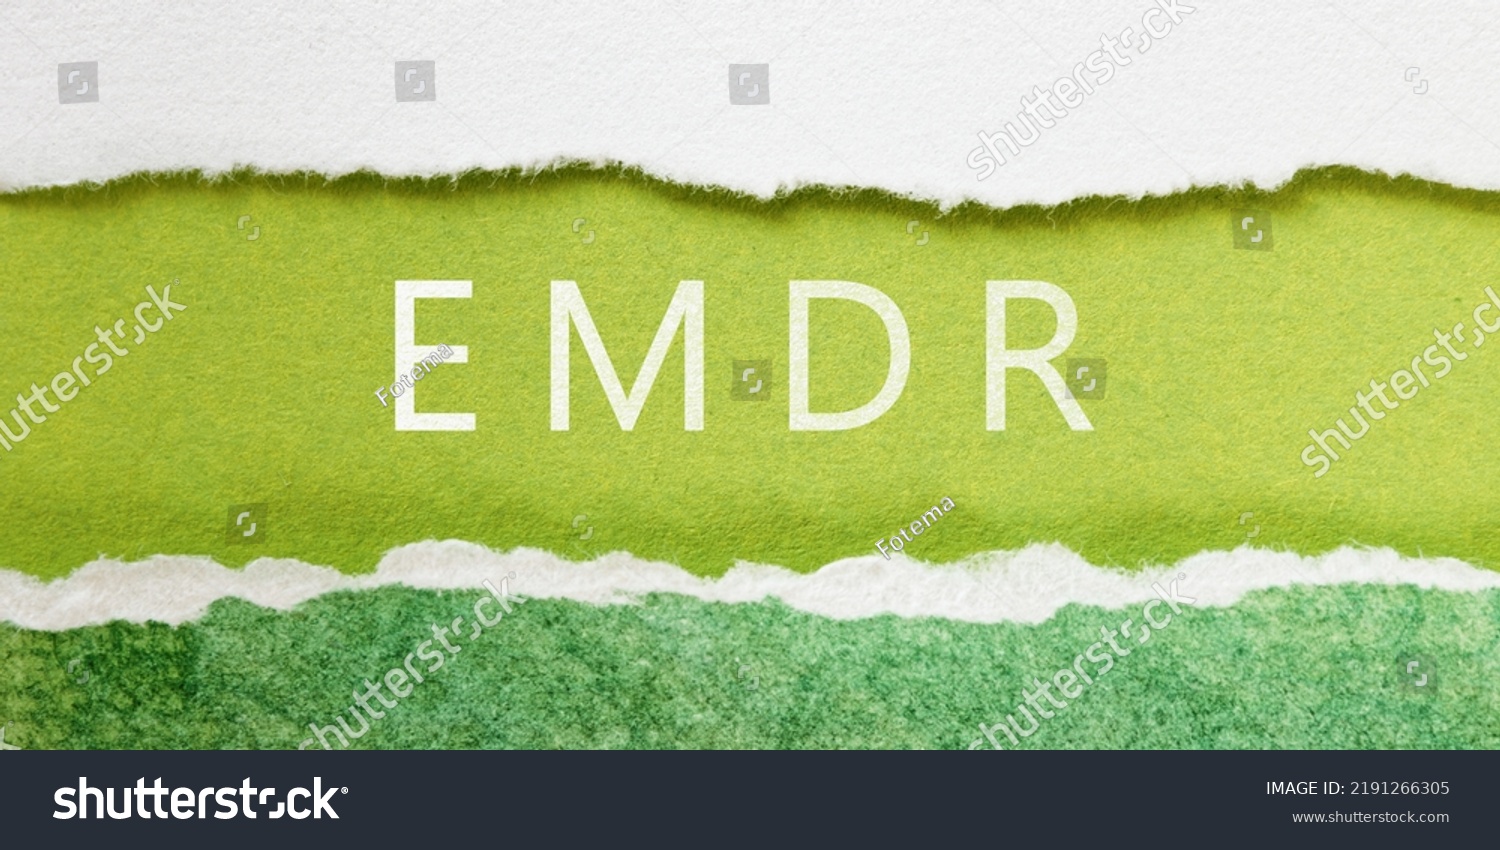 Eye Movement Desensitization and Reprocessing psychotherapy treatment concept. Letters EMDR written on a green torn paper. #2191266305